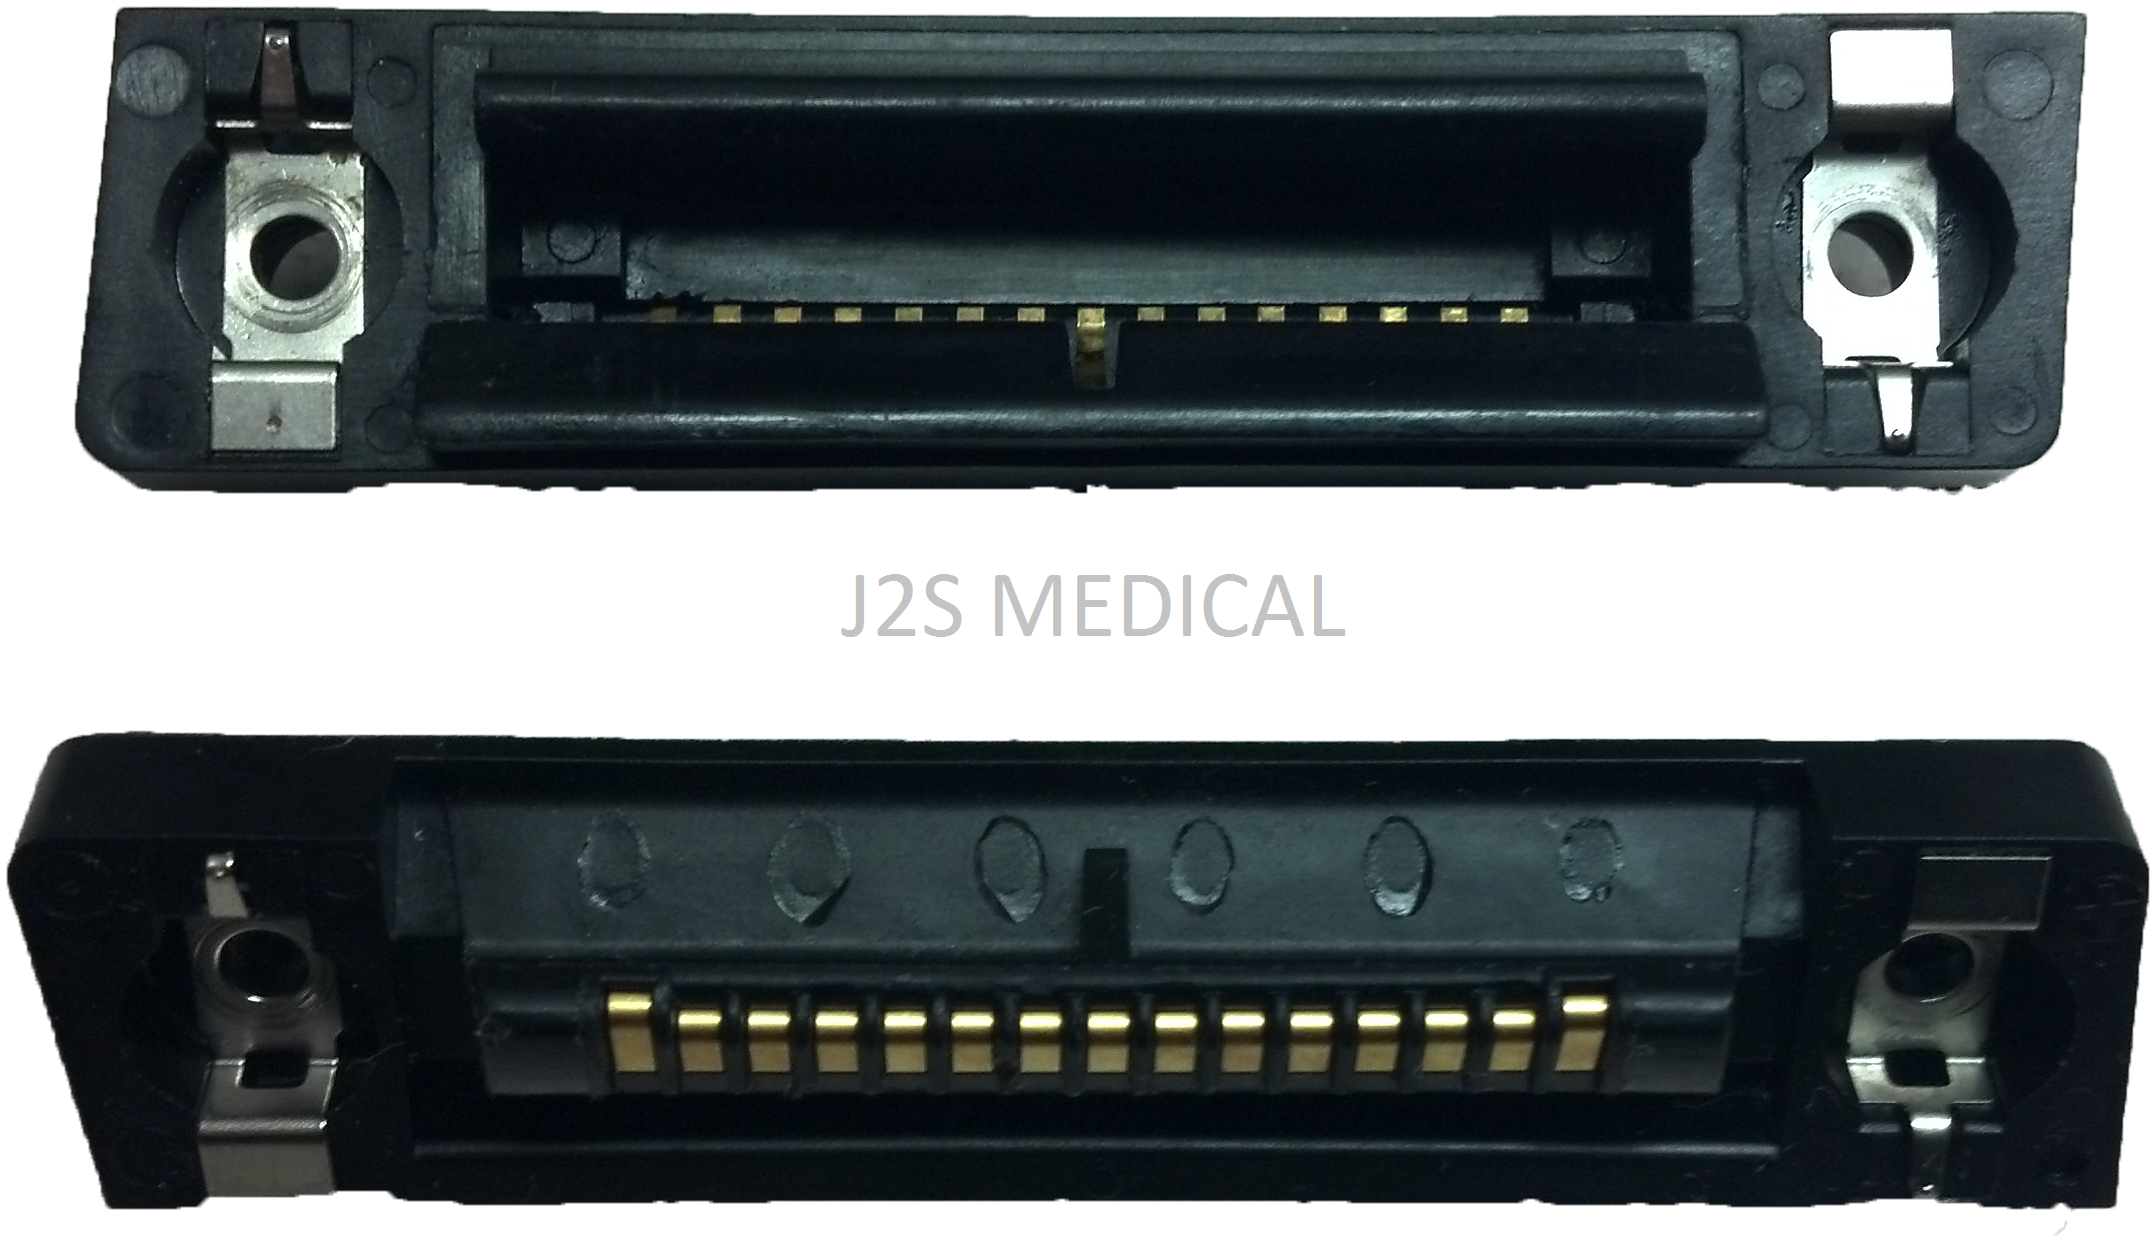 Recertified IUI Connectors For Carefusion Medley 8000/8015 Image